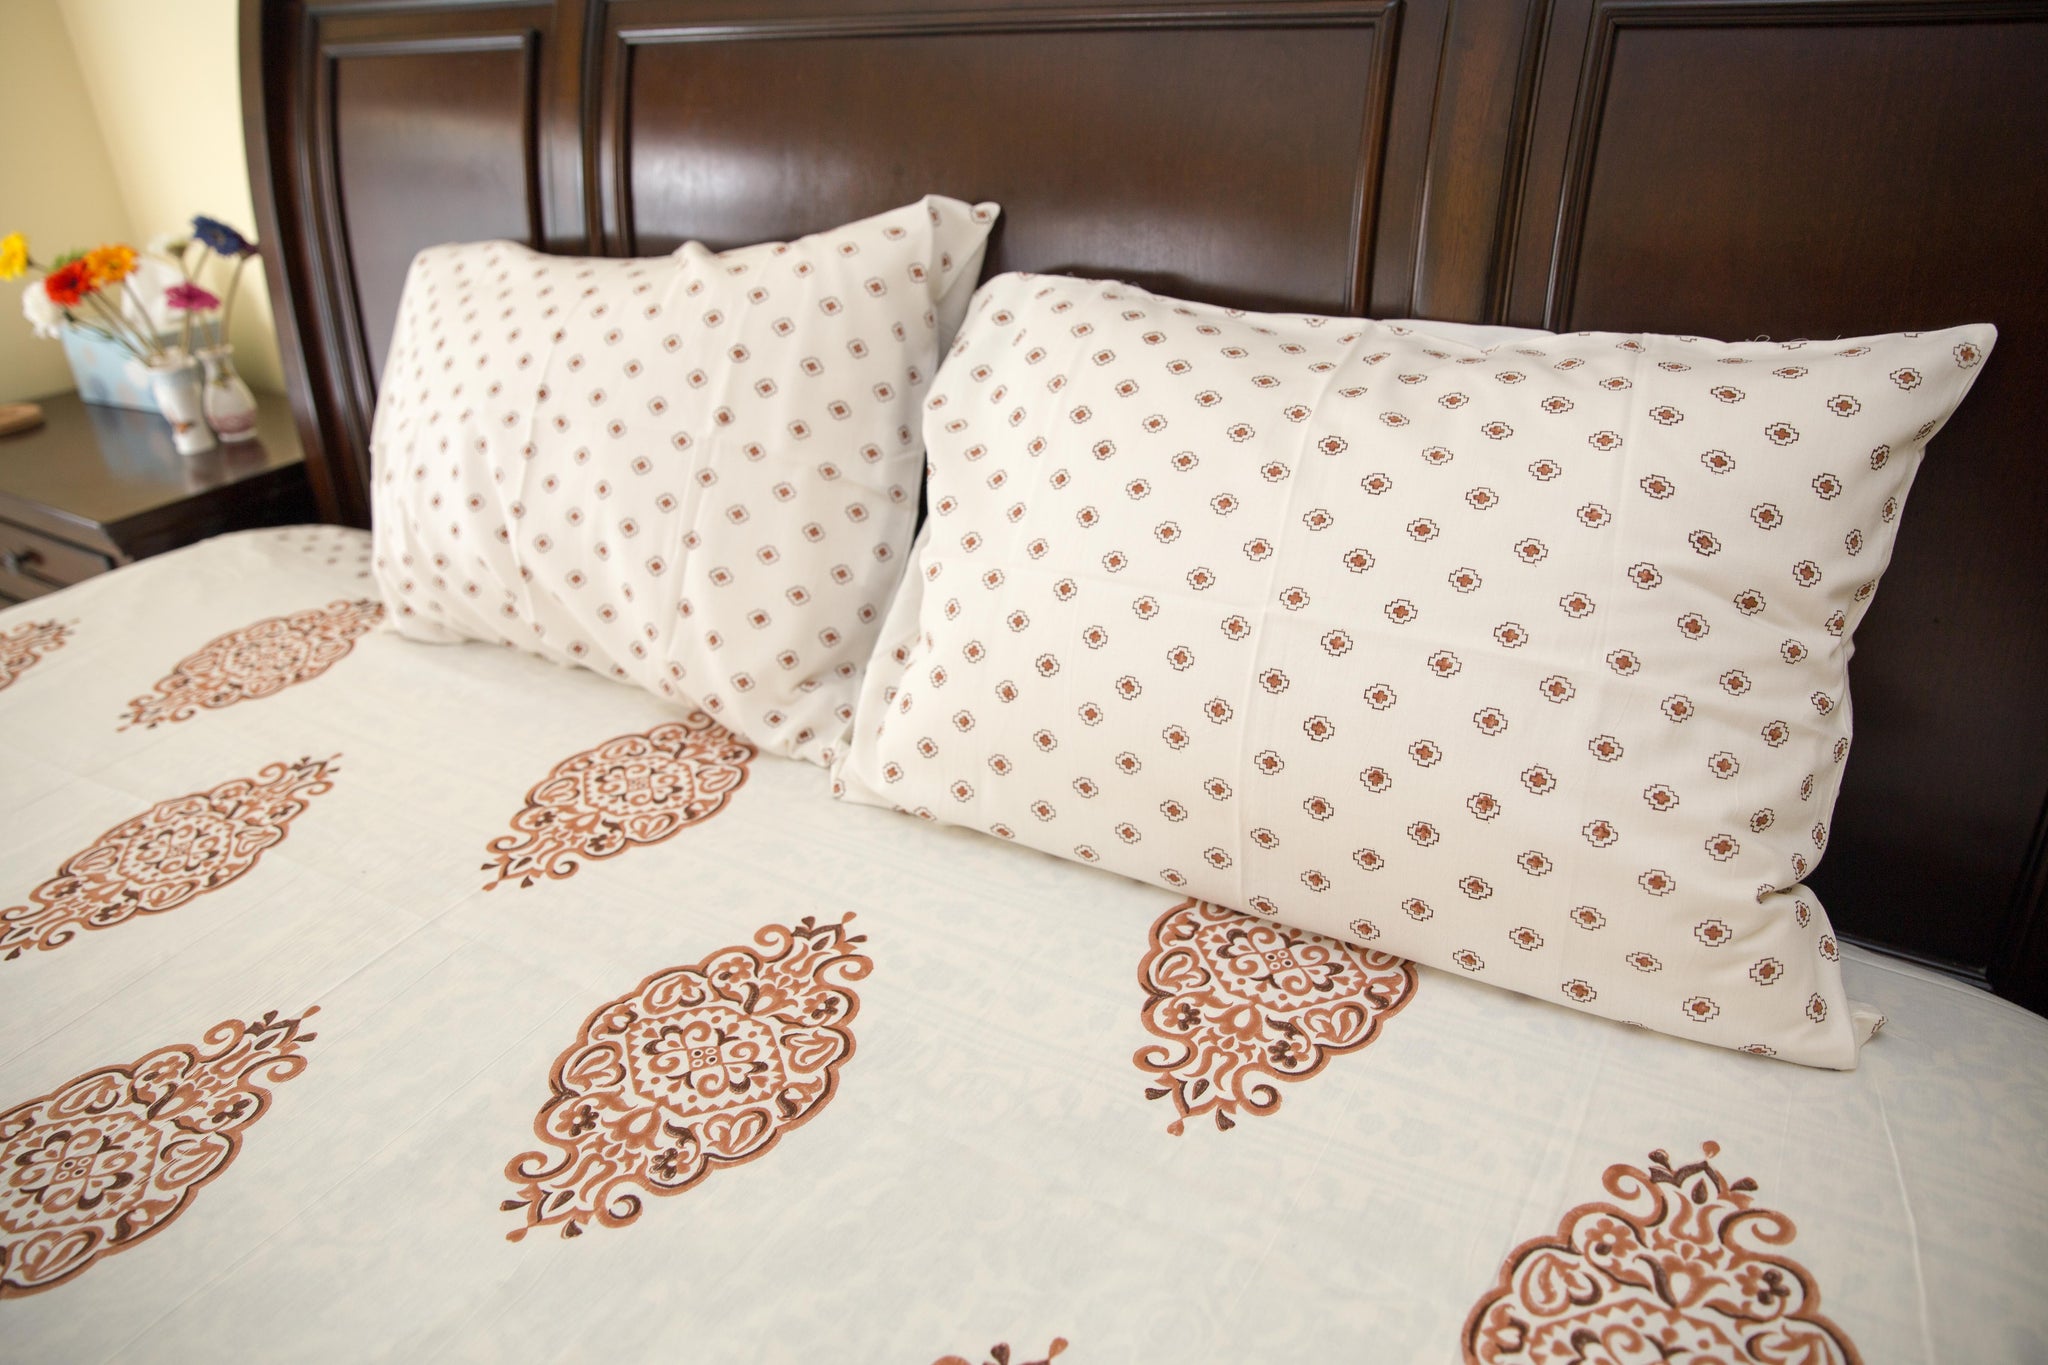 Handmade Block-Printed Bed Sheet with Pillowcases Off white color with designs - King Size